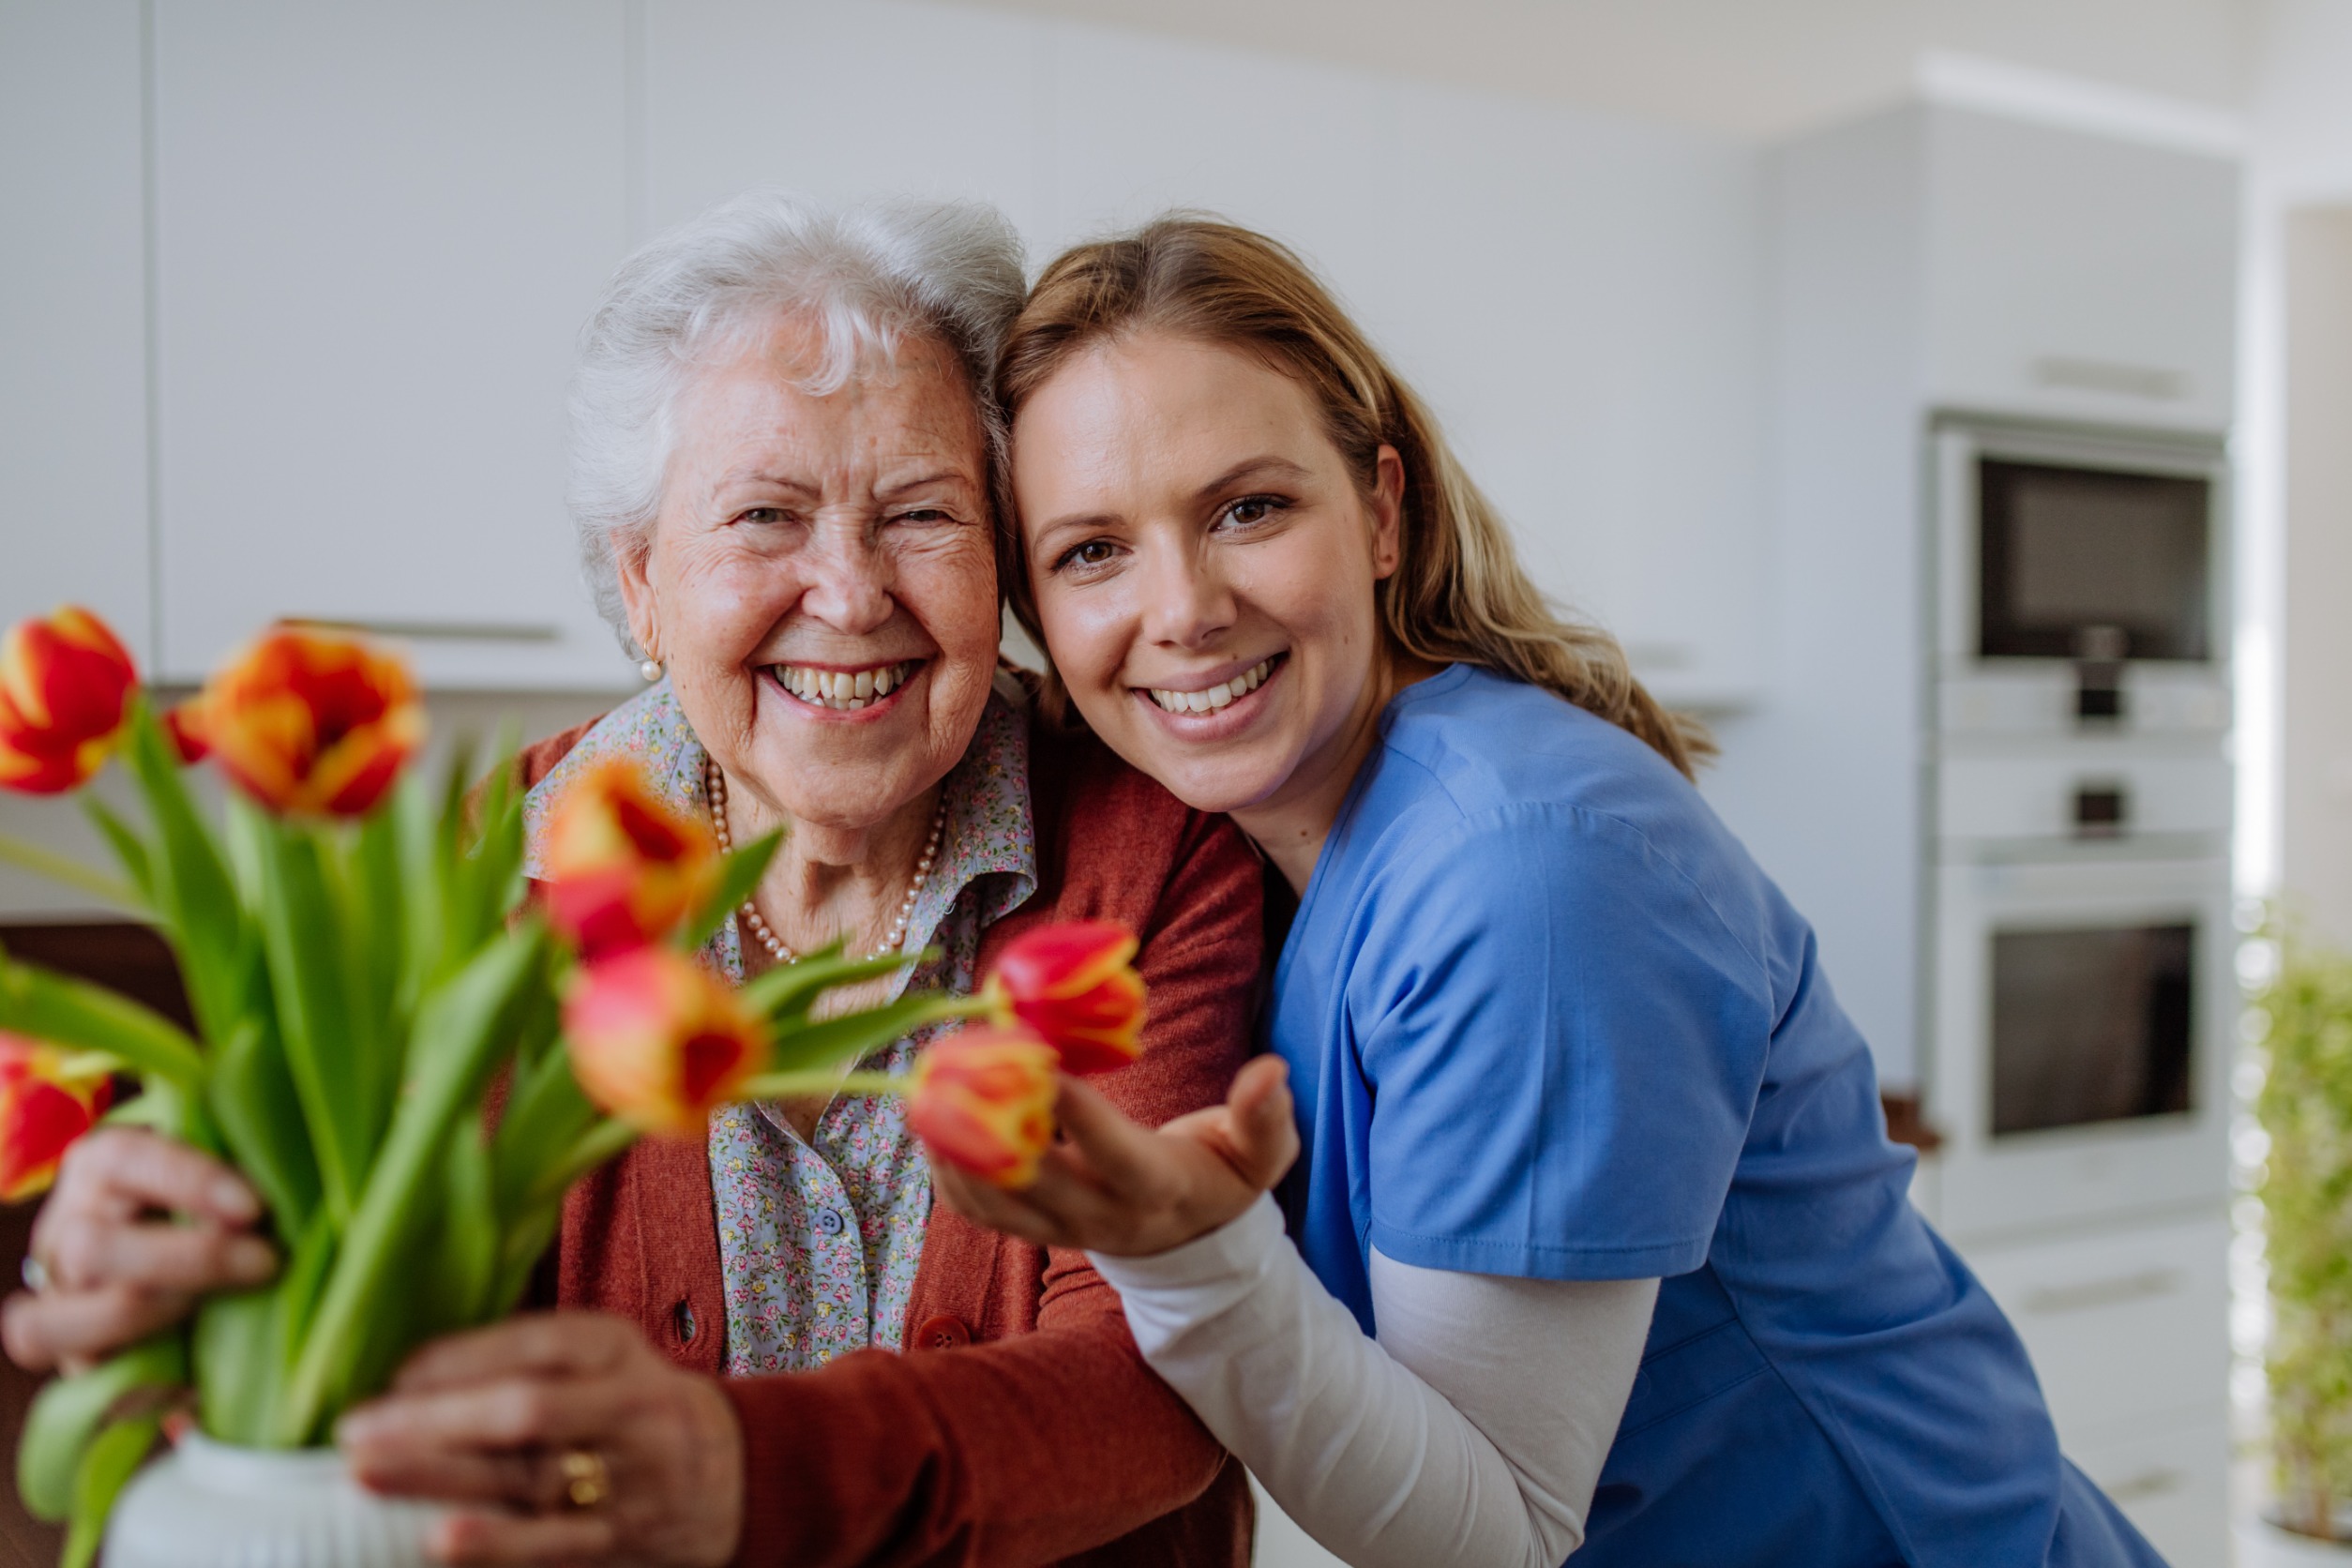 25 Things an In-Home Caregiver Can Help With